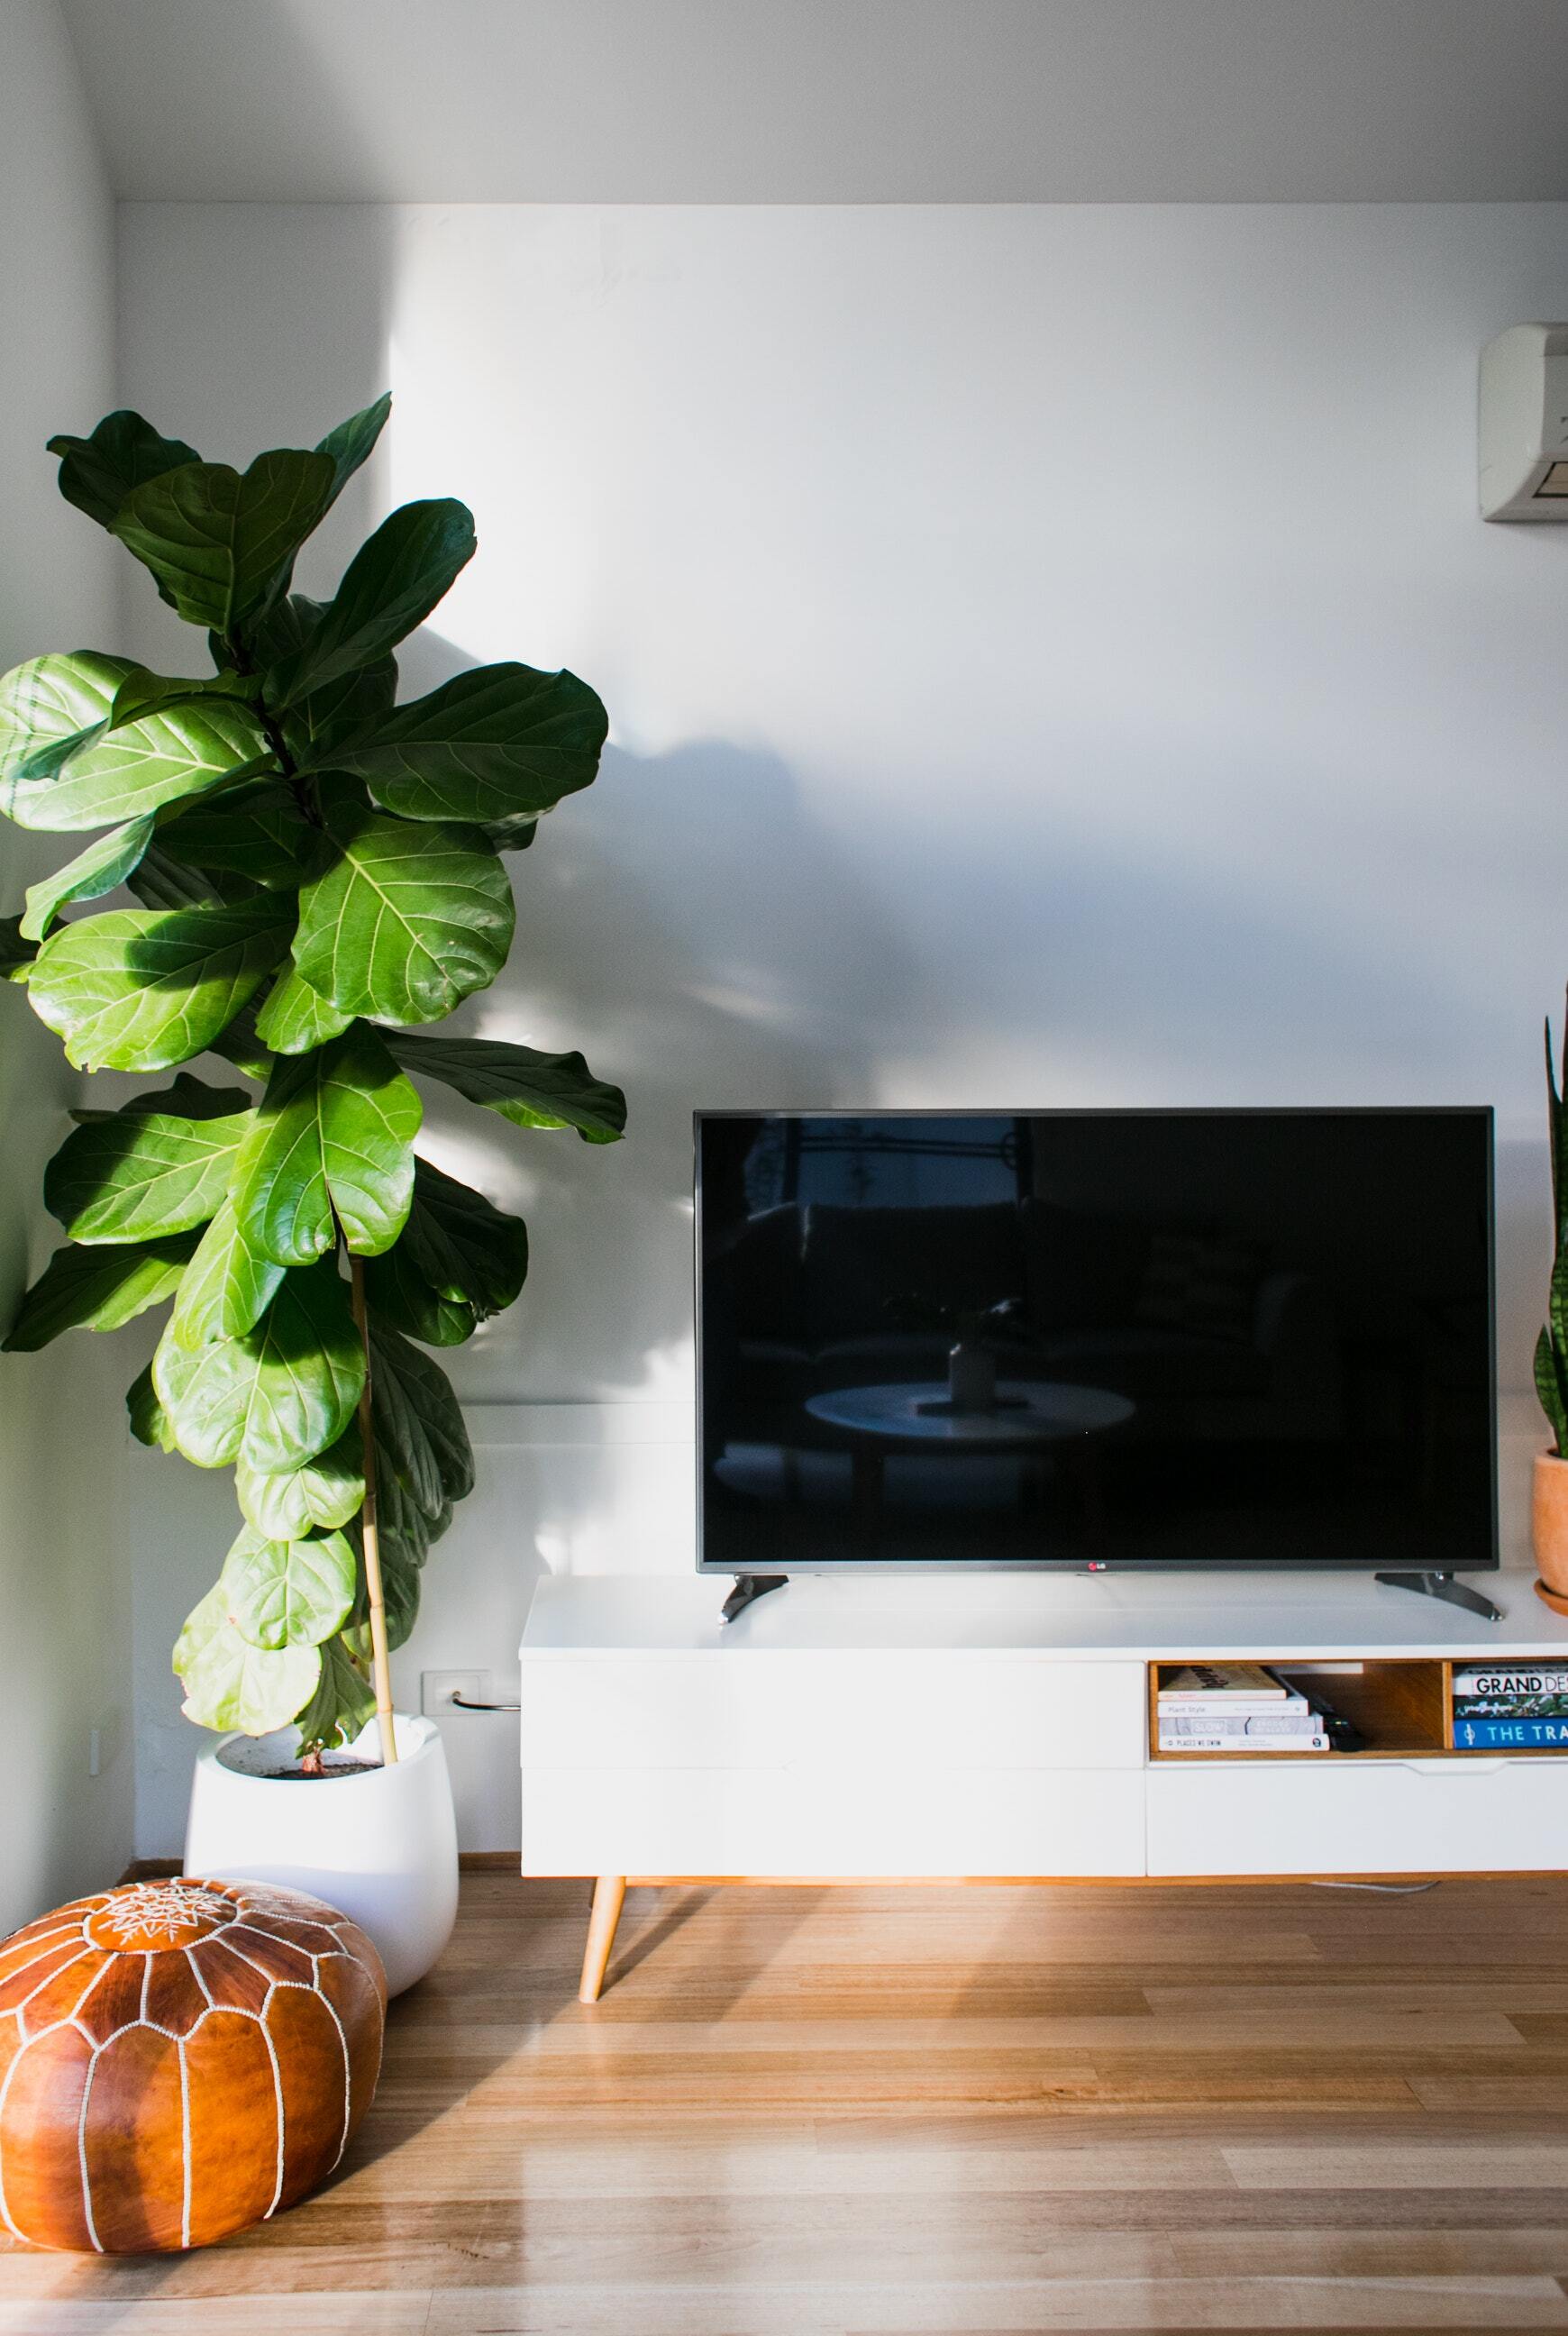 A fiddle leaf fig in a white pot is next to an entertainment system.